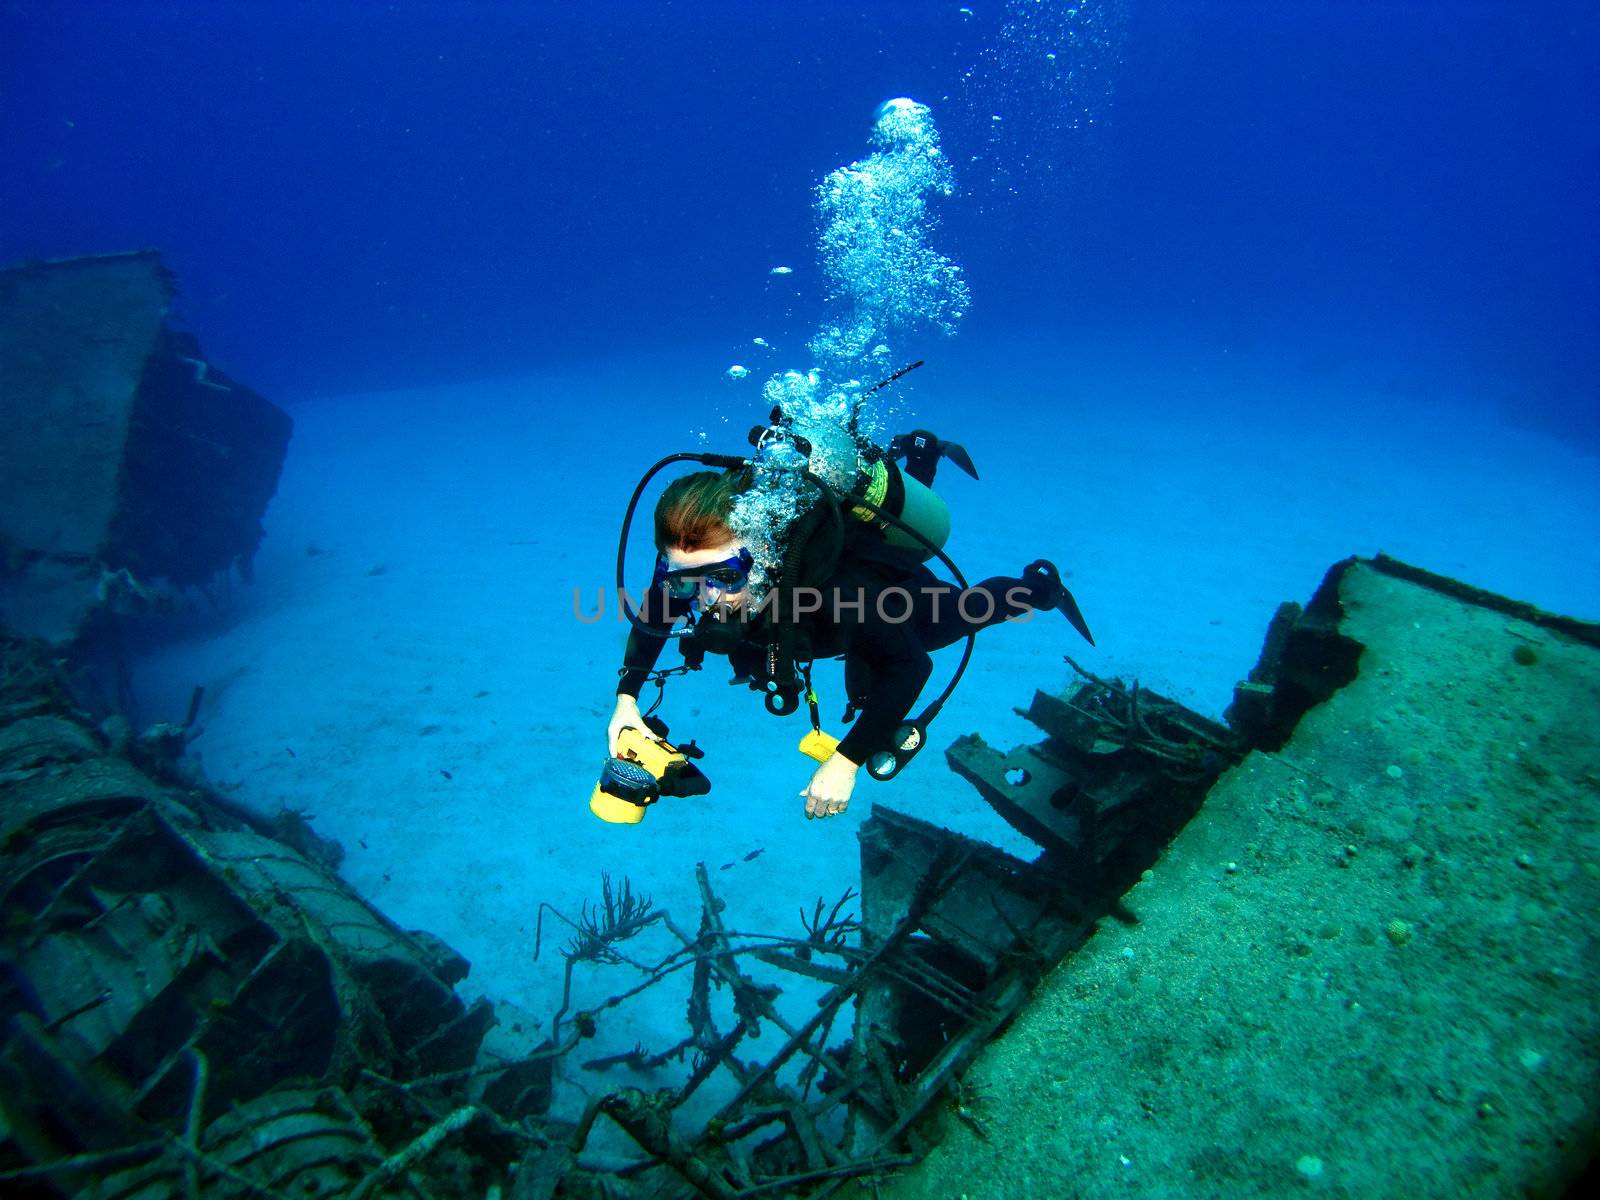 Diver photographing a Sunken Shipwreck in Cayman Brac